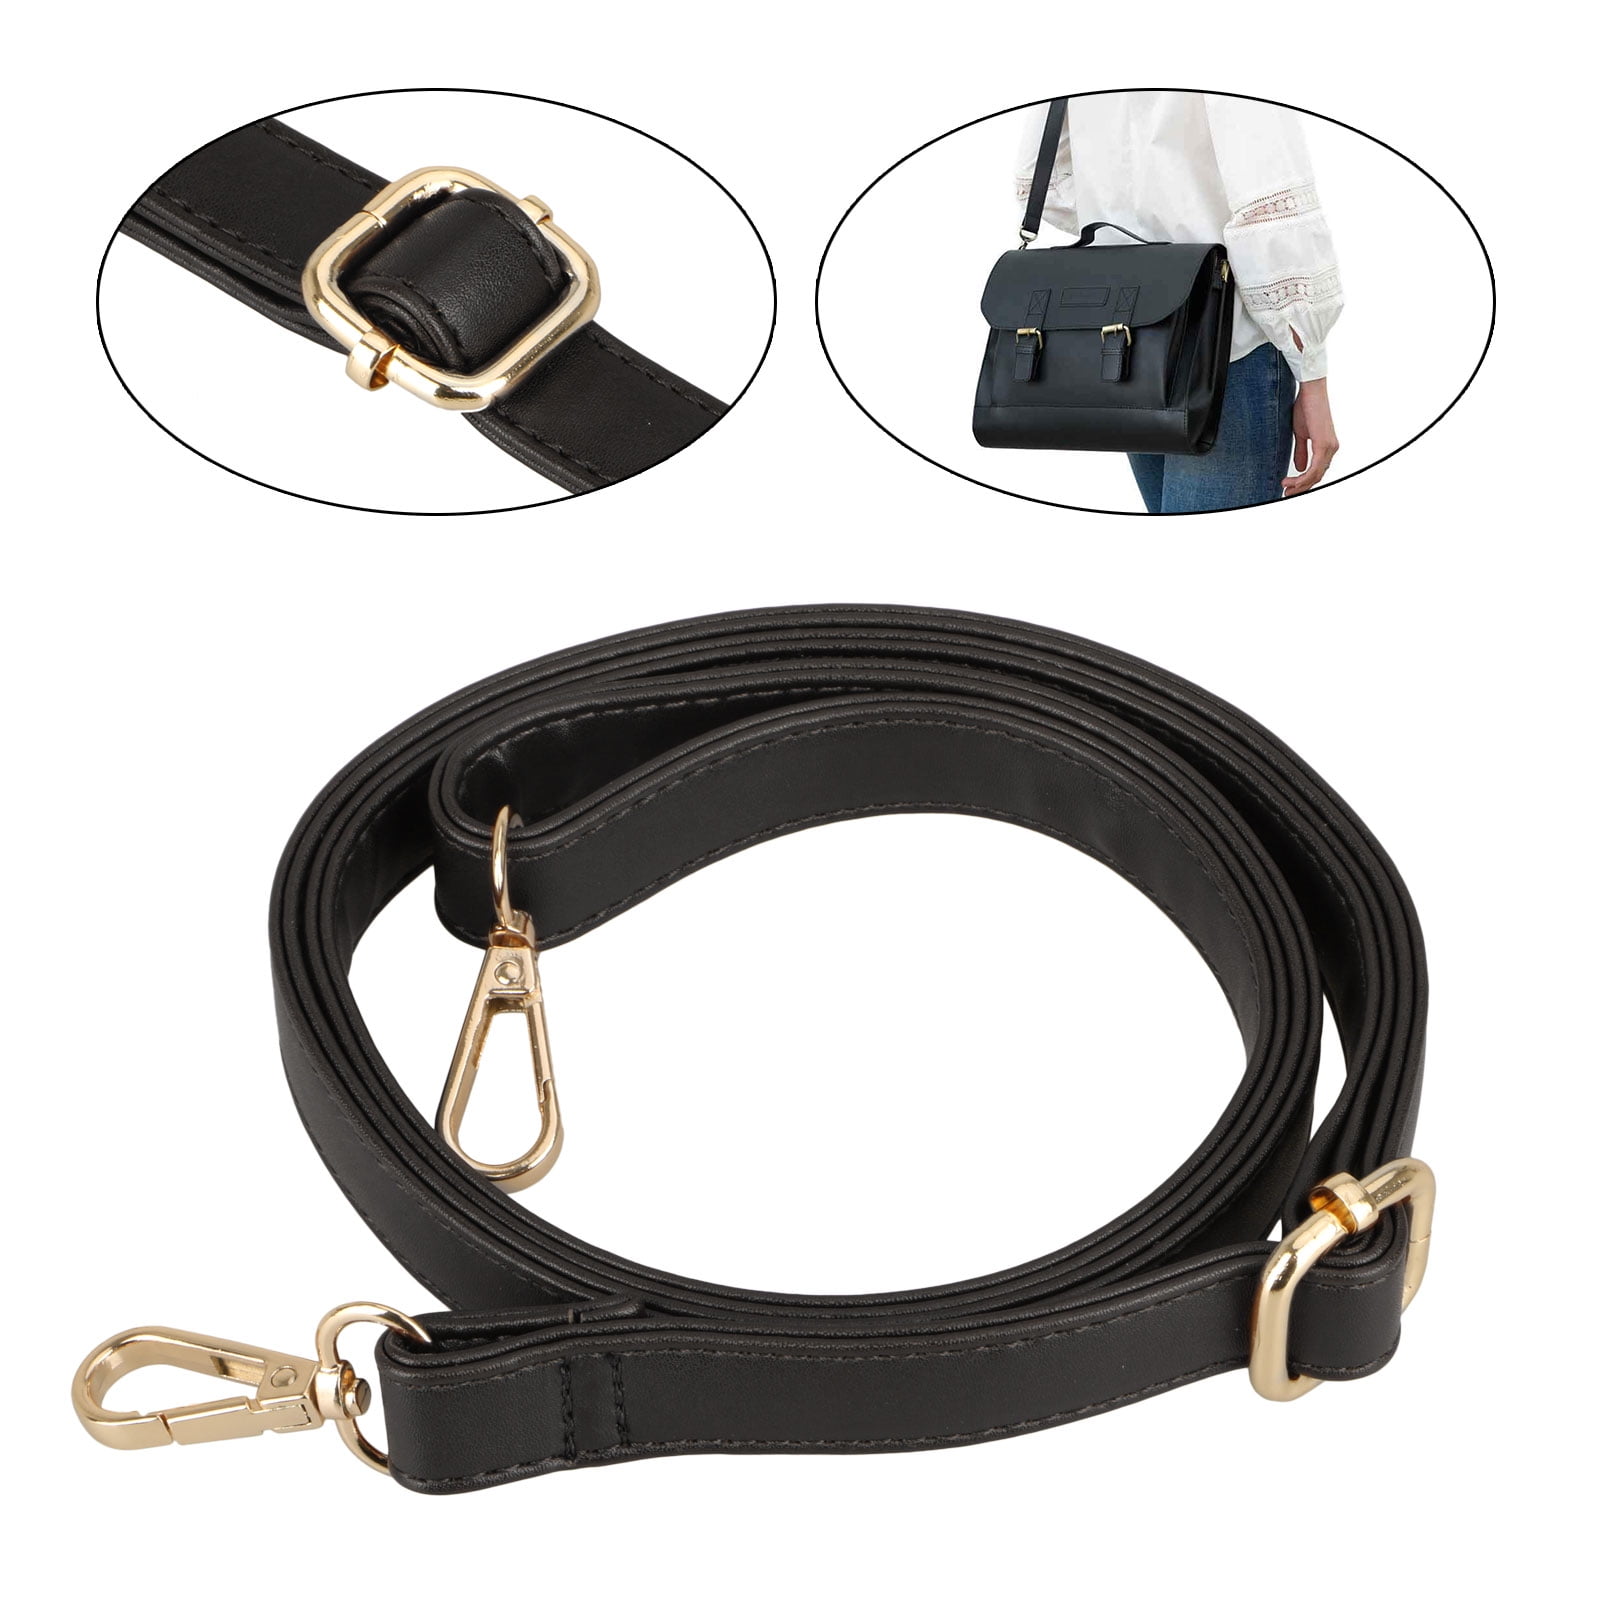 Leather Bag Strap Genuine Leather Cross Body Handle Leather Bag Handles Adjustable Handbag Strap Leather Handbag Strap with Best Quality